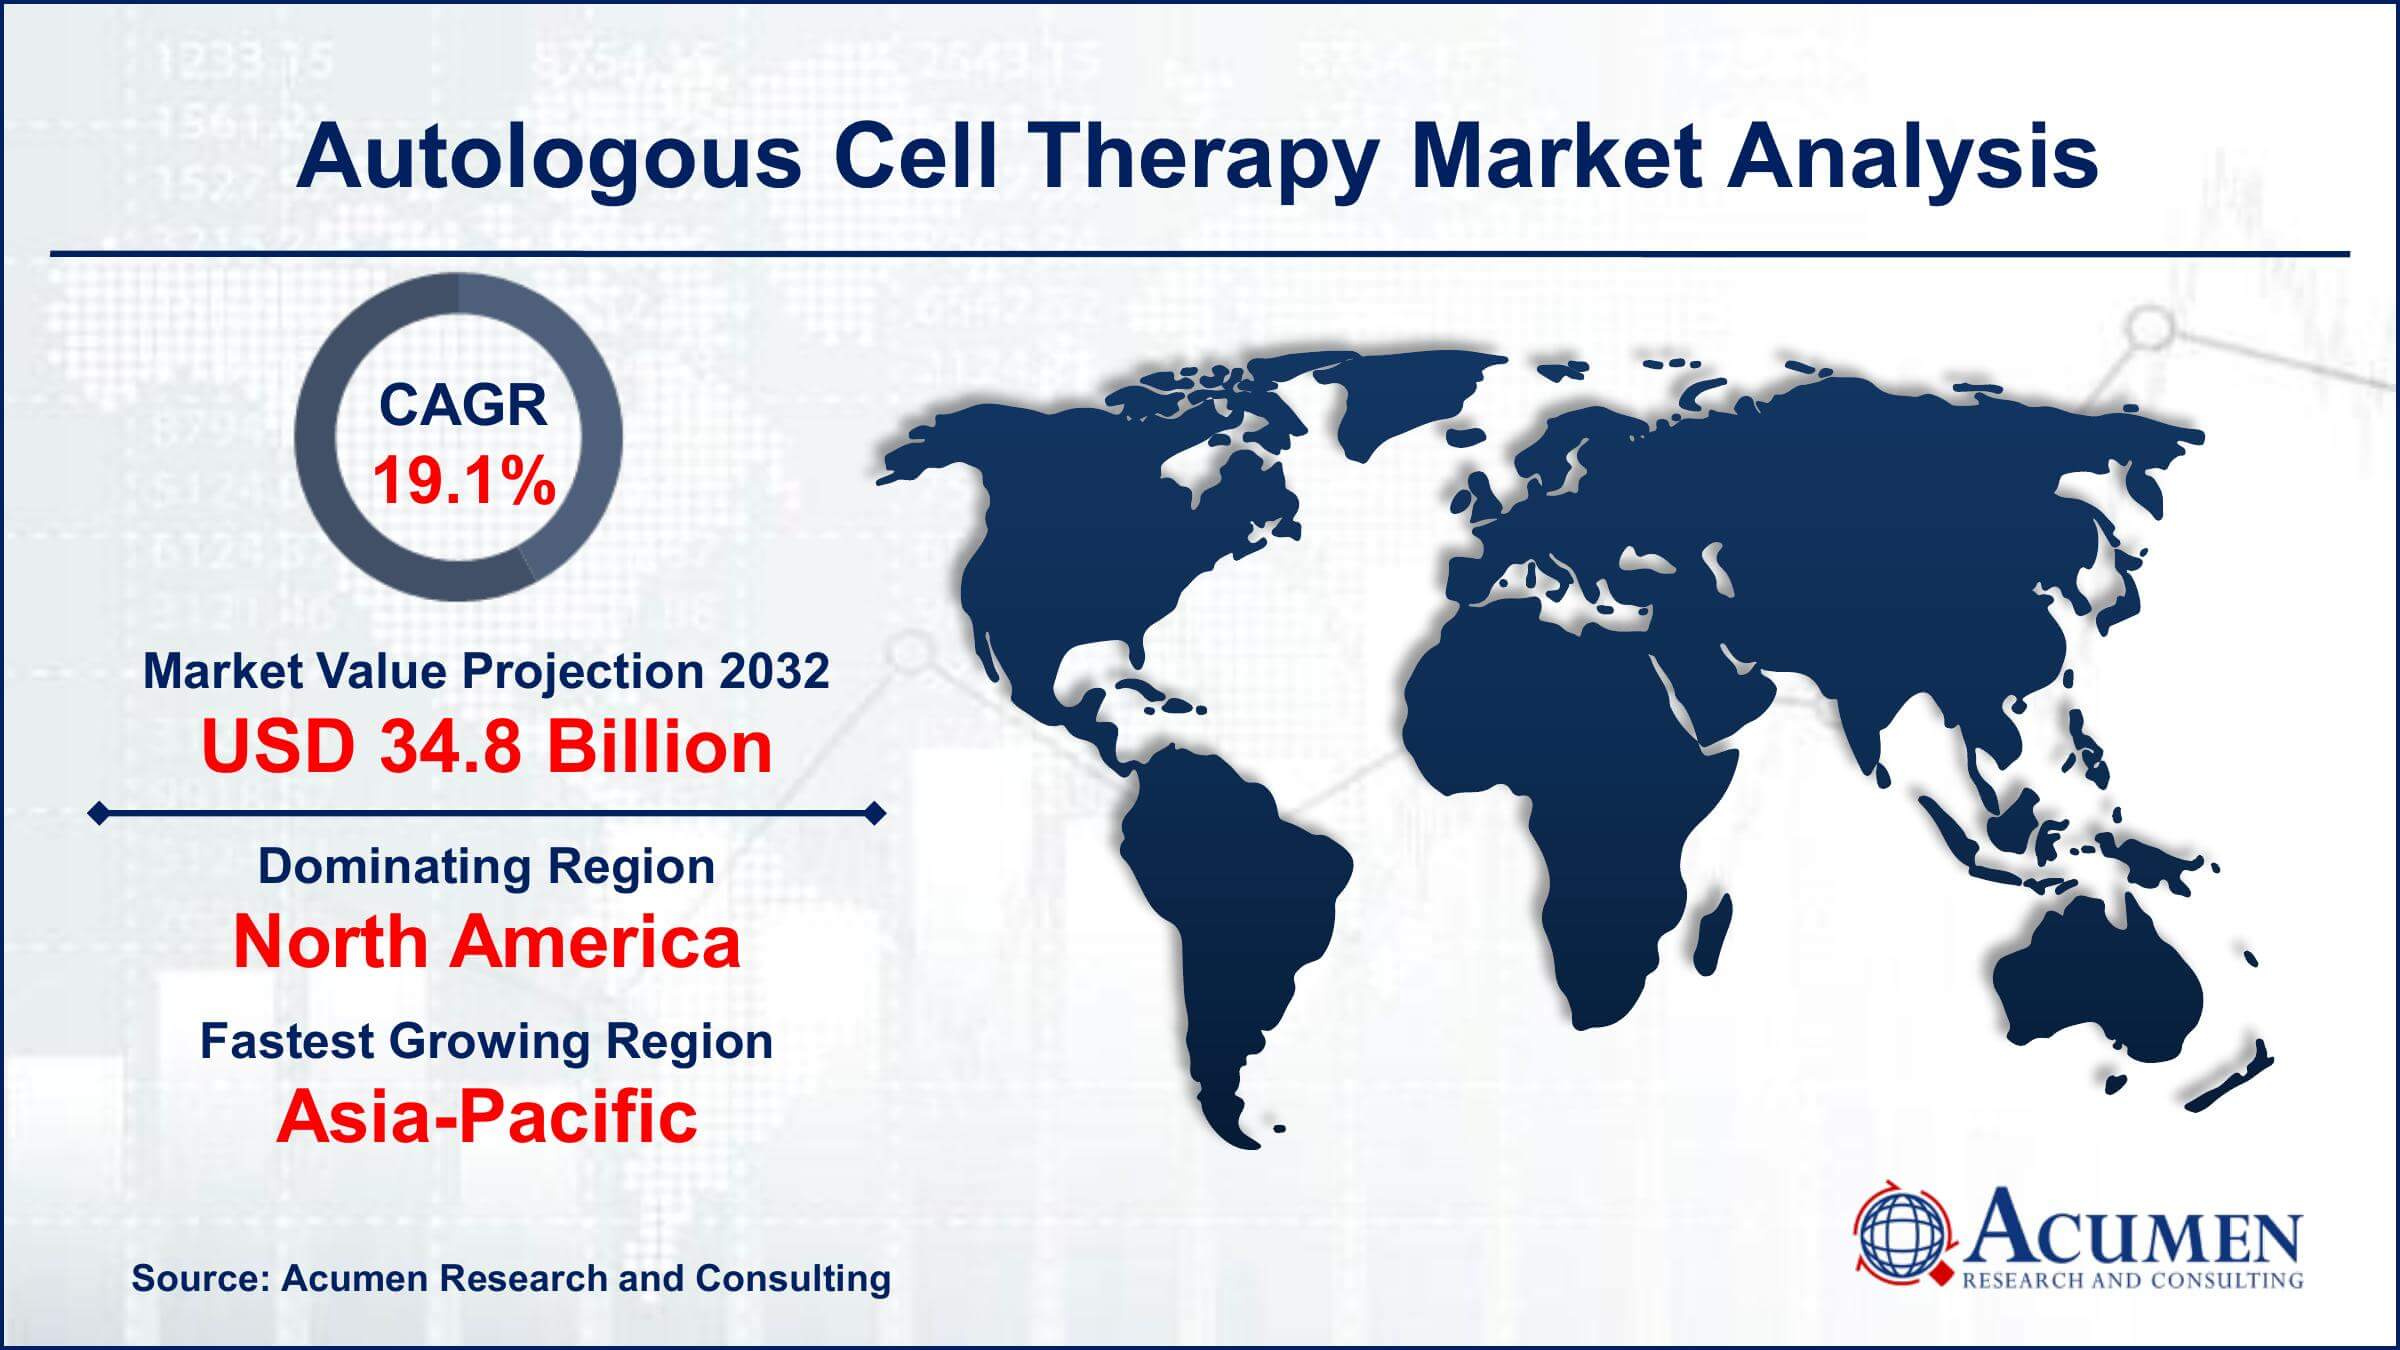 Global Autologous Cell Therapy Market Trends